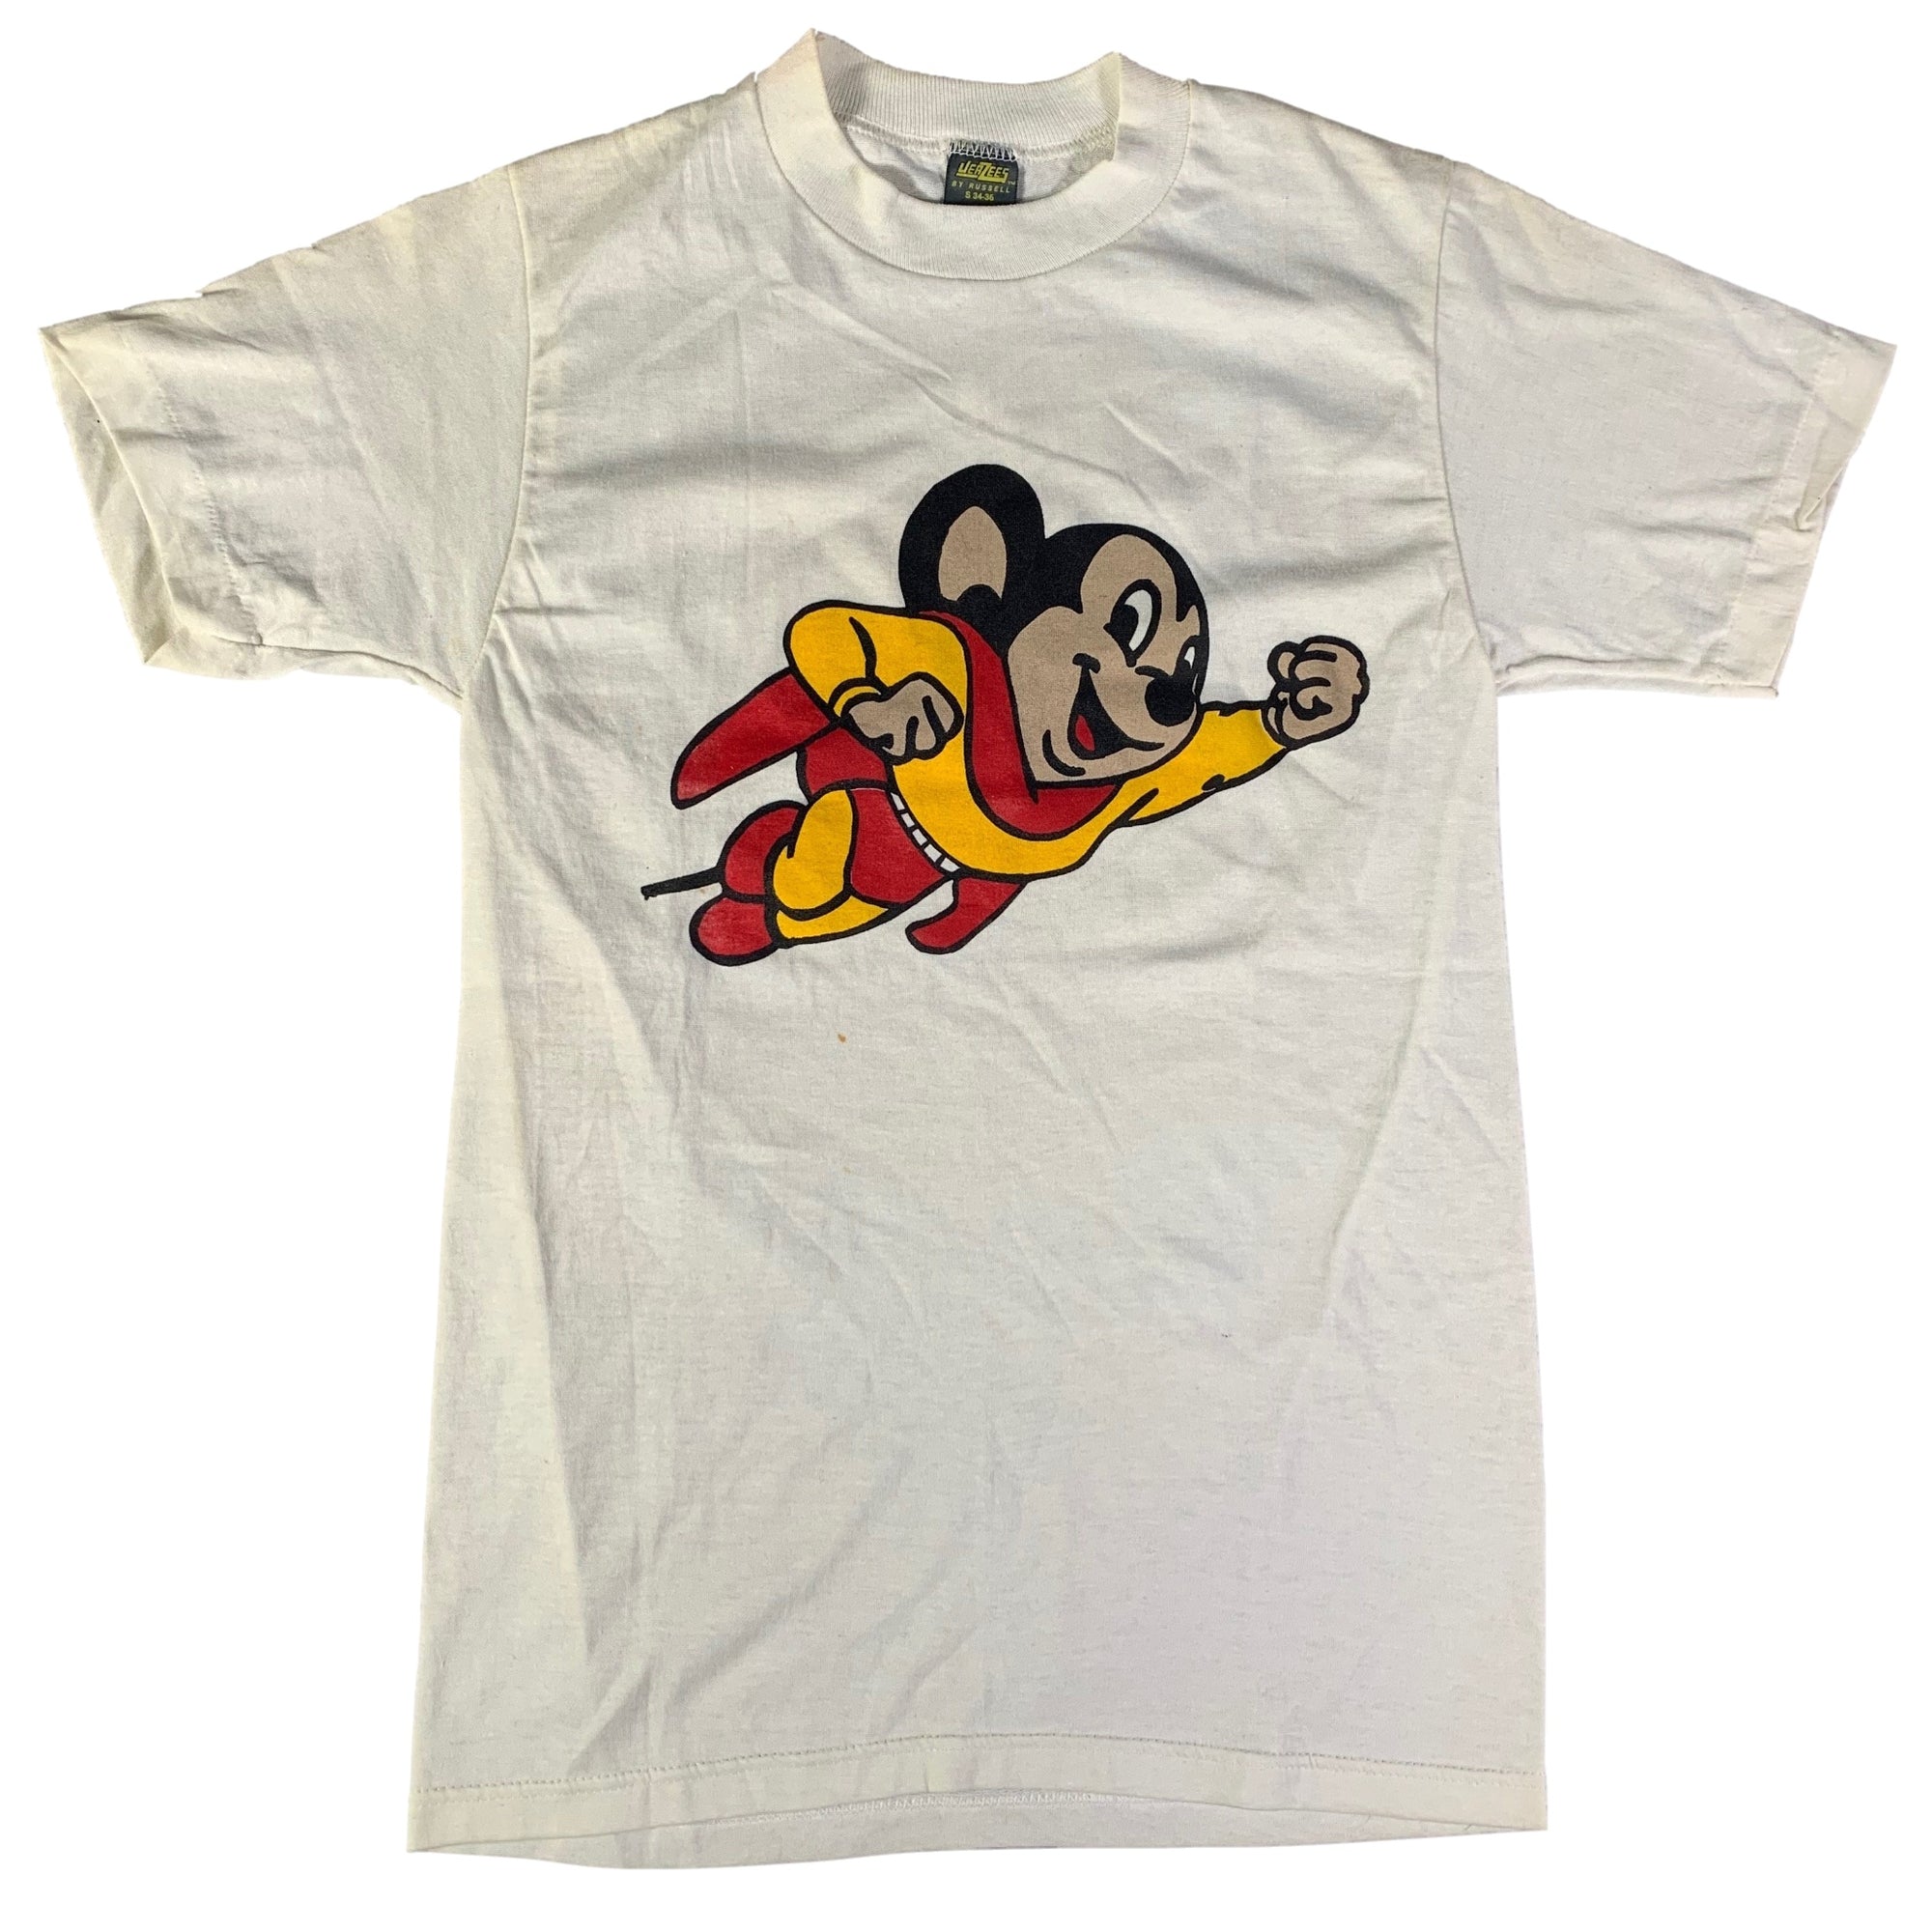 Vintage Mighty Mouse "Terrytoons" T-Shirt - jointcustodydc